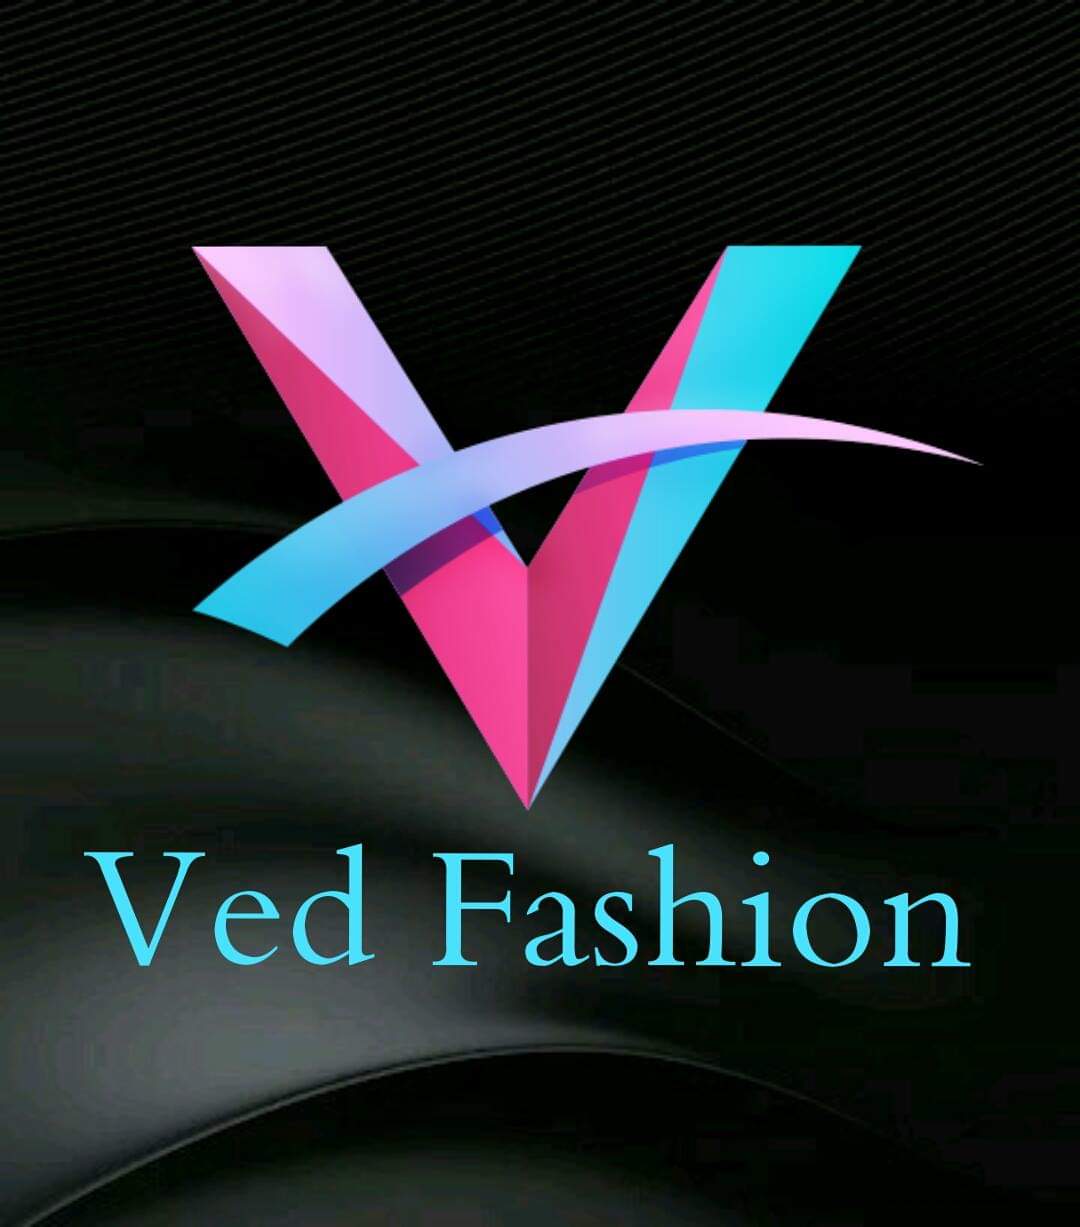 Ved Fashion